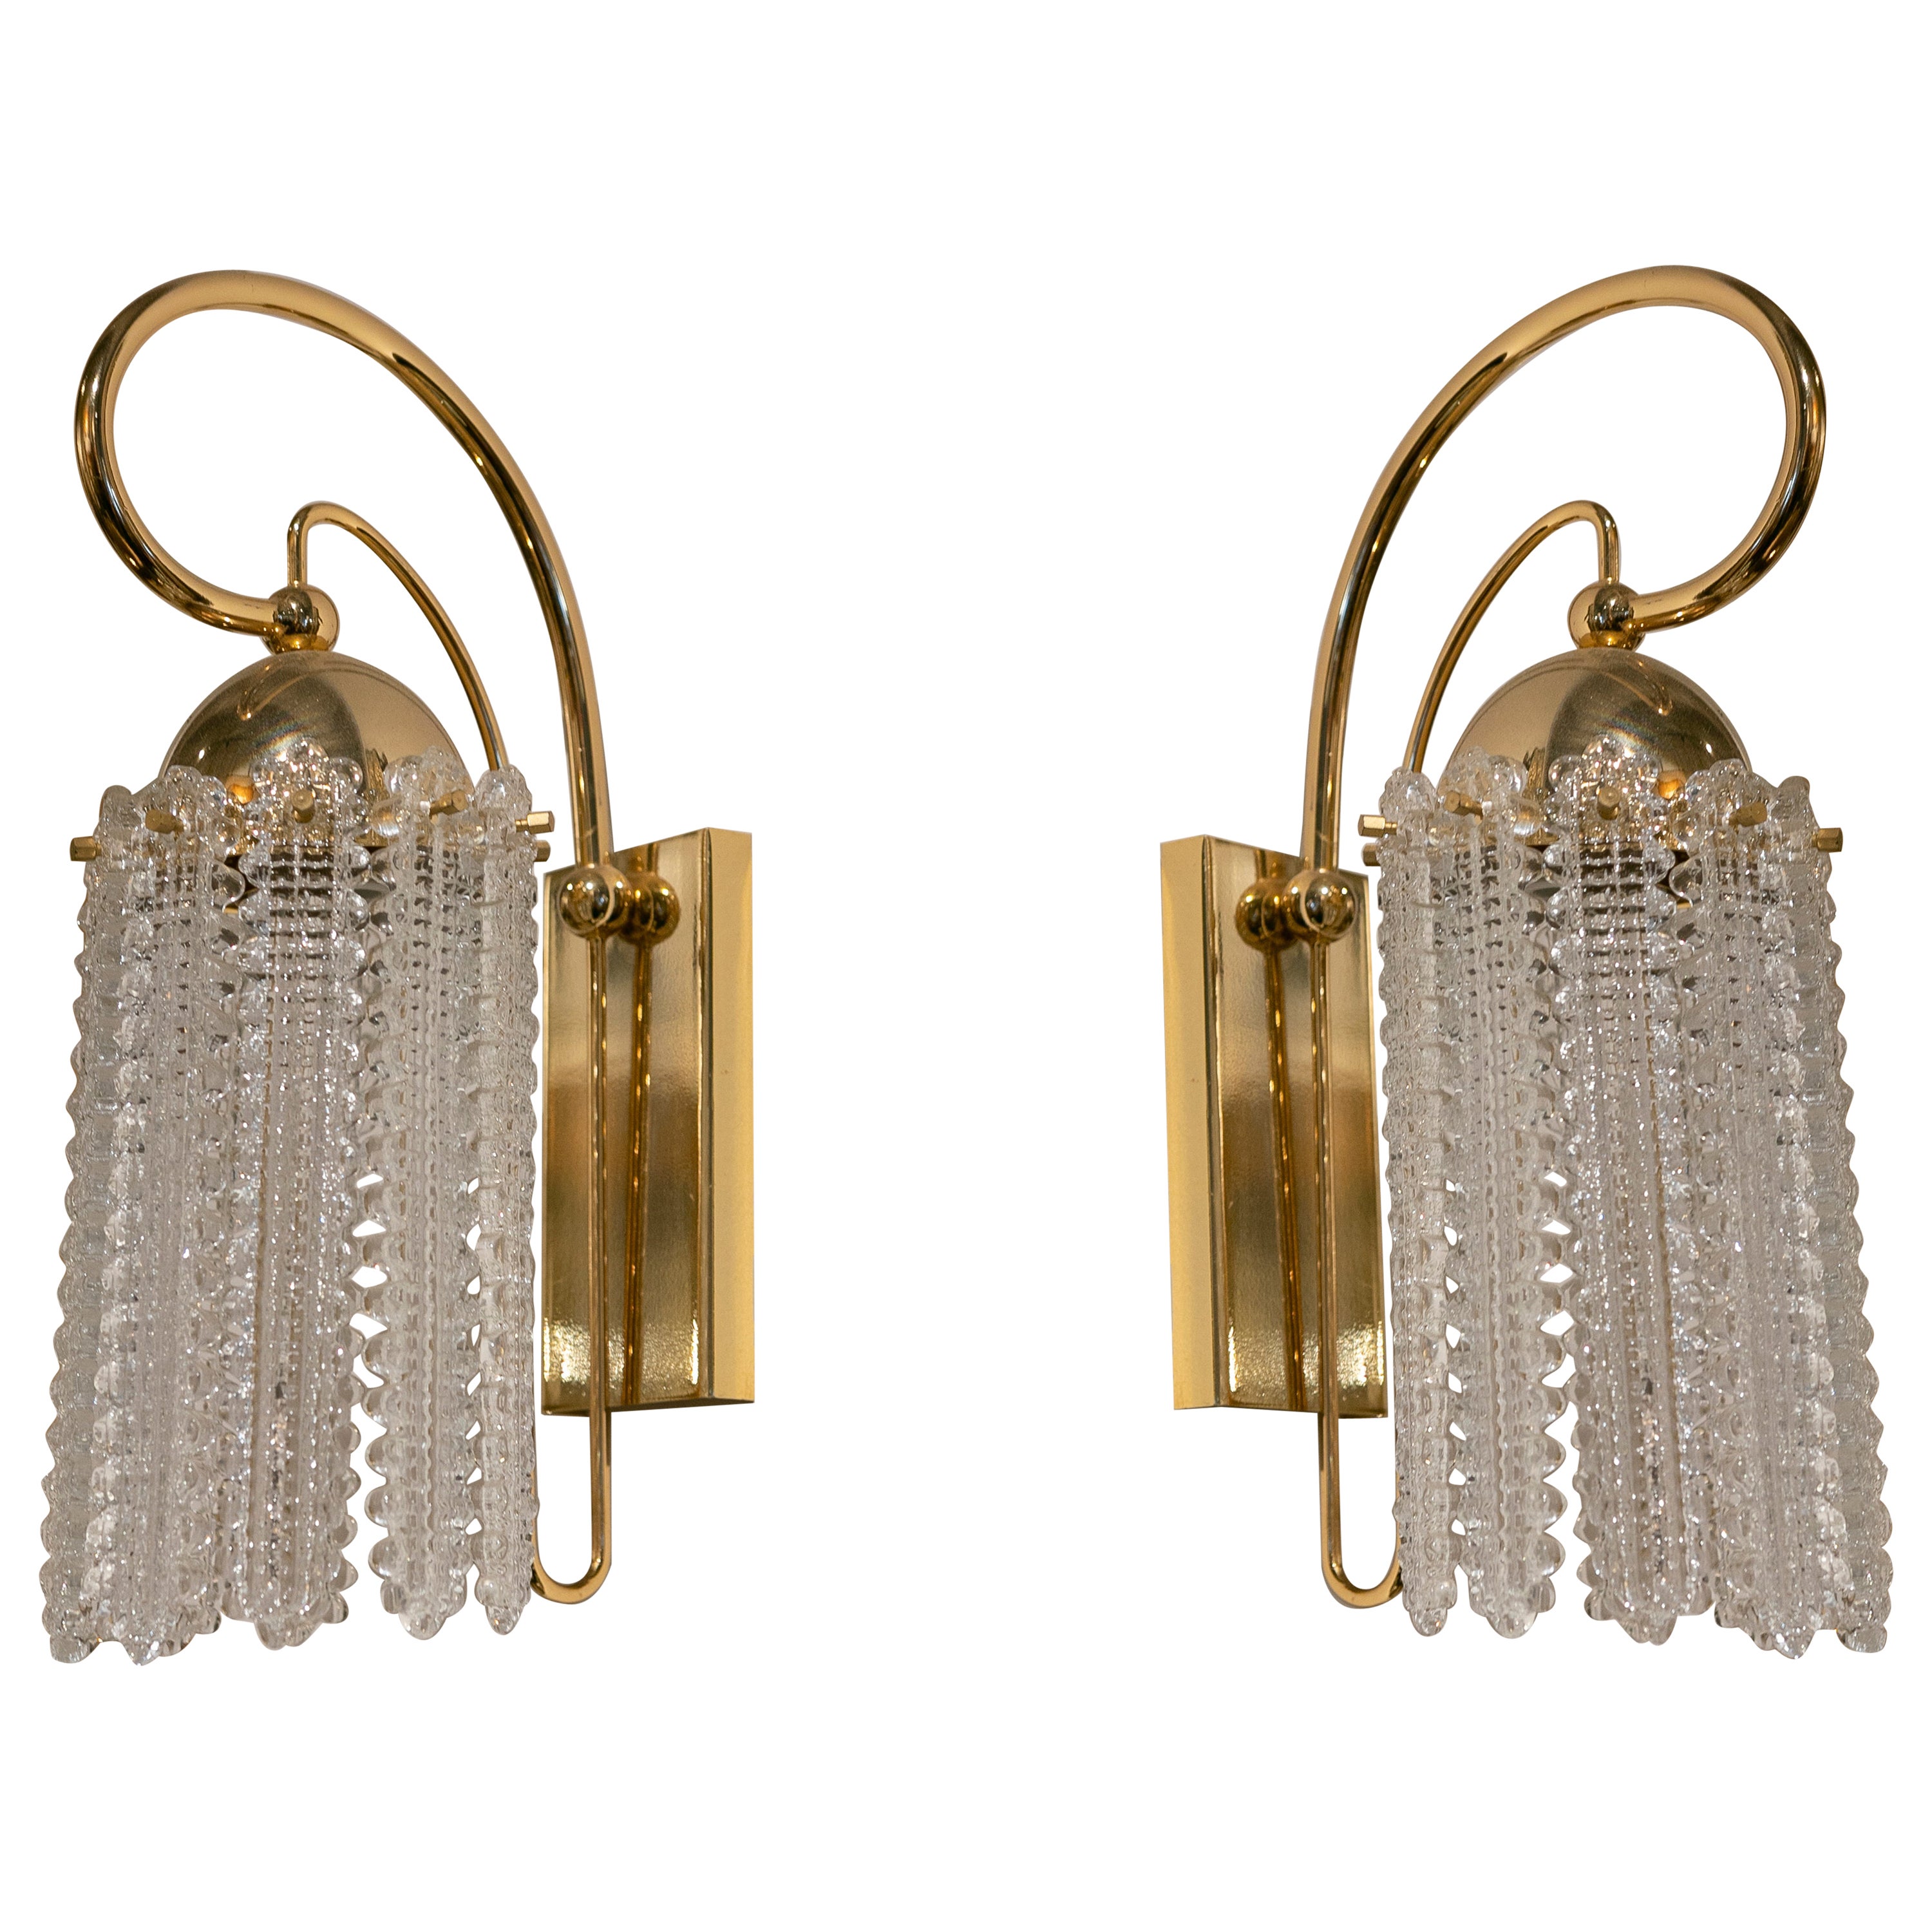 1970s Spanish Pair of Sconces in Gilded Metal with Crystals For Sale